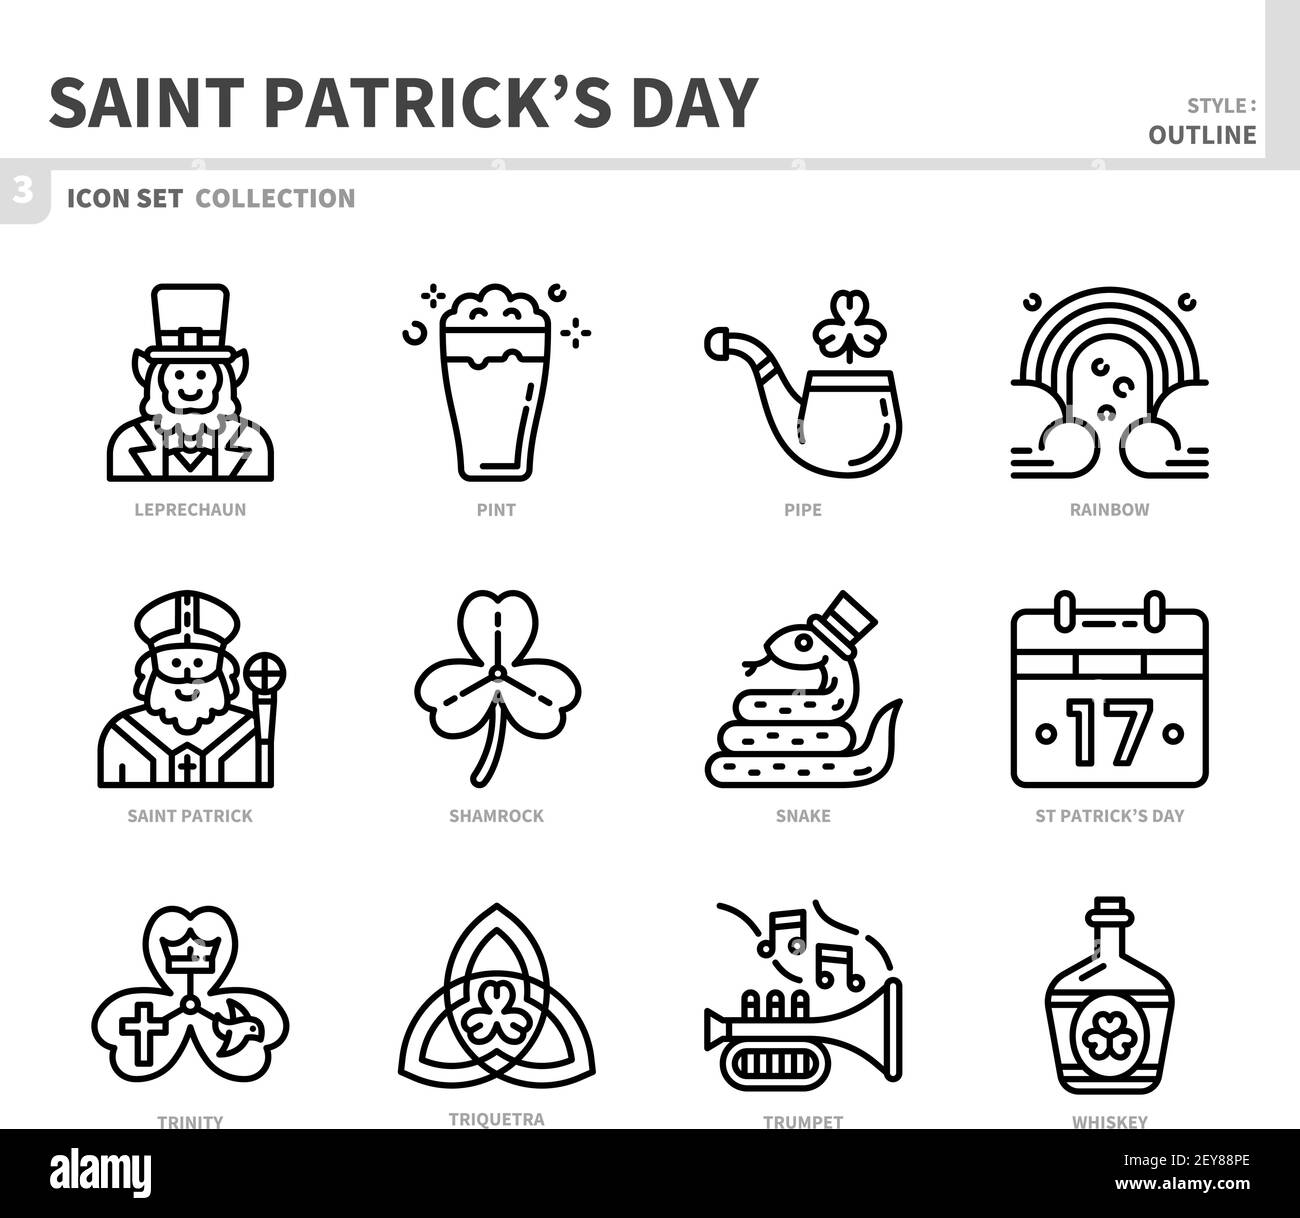 saint patrick's day icon set,outline style,vector and illustration Stock Vector